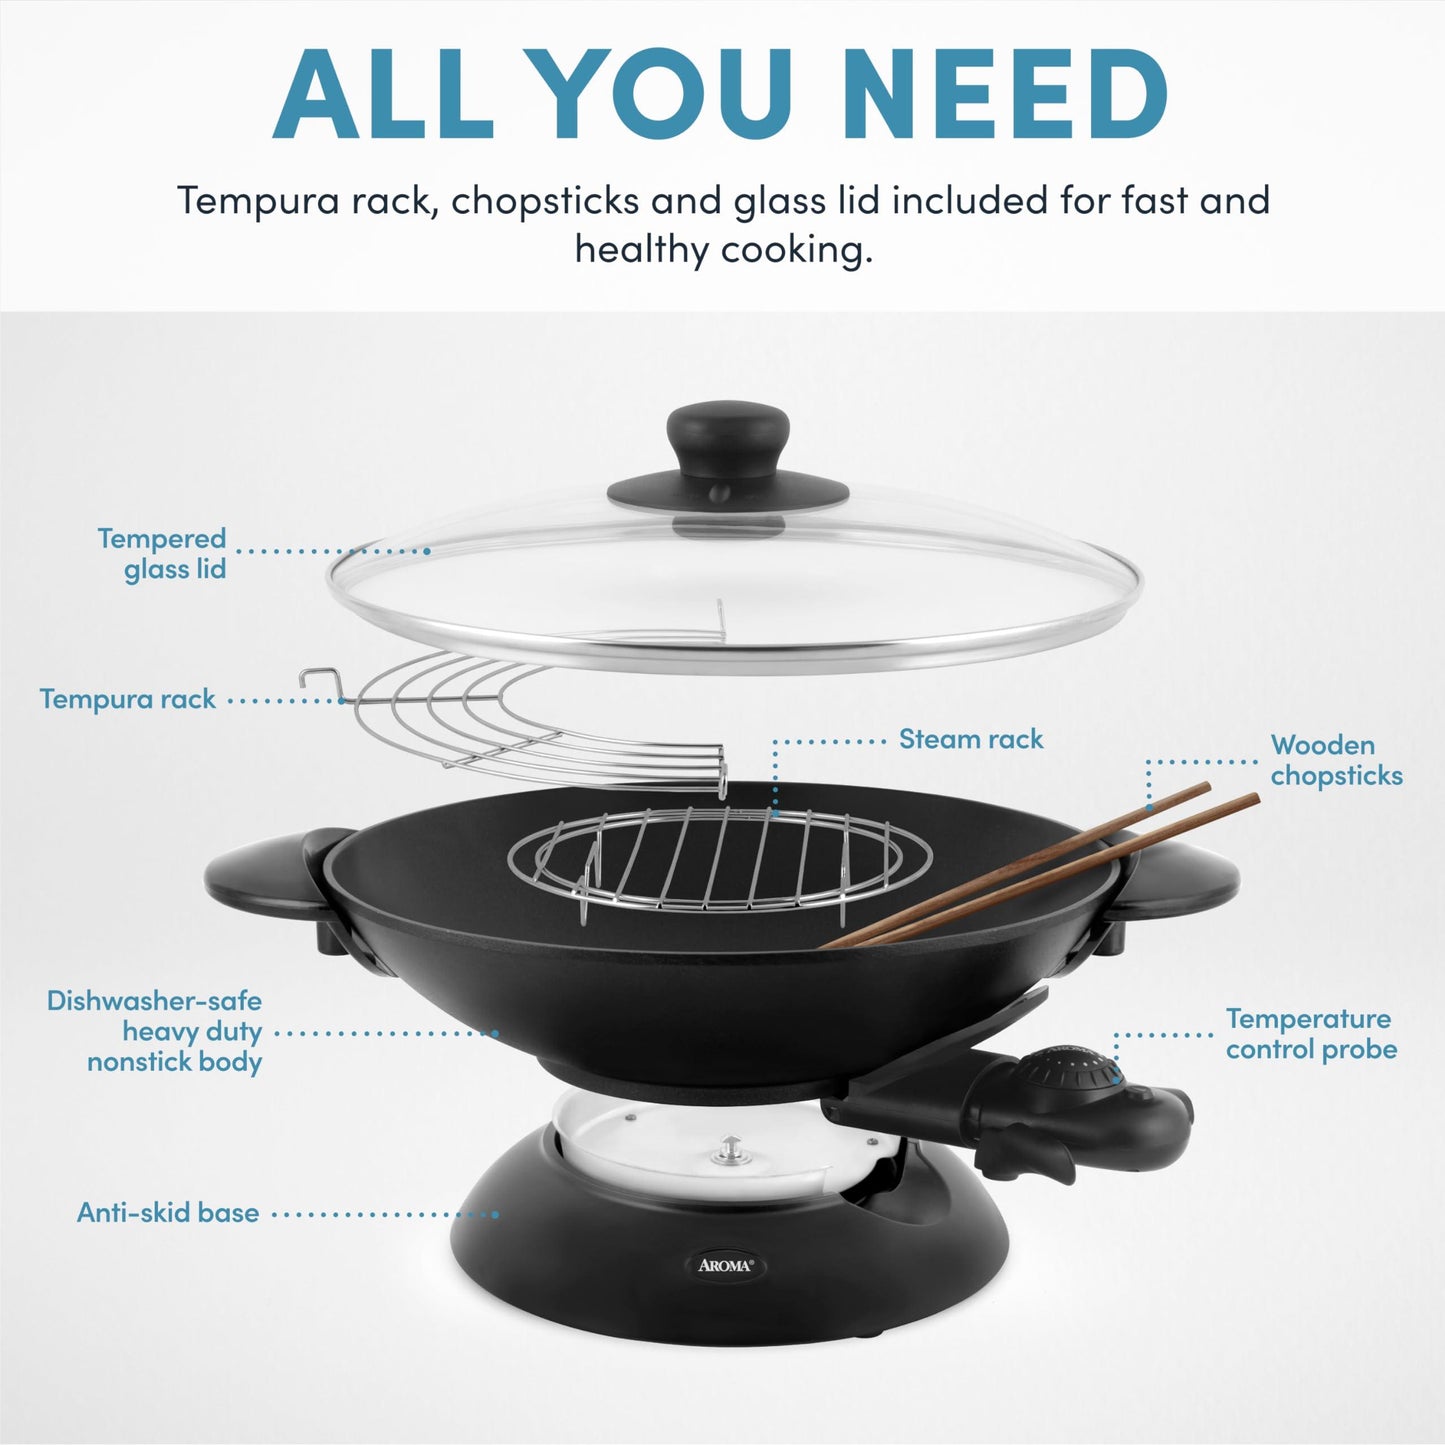 Aroma Housewares AEW-306 Electric Wok with Tempered Glass Lid Easy Clean Nonstick, Cooking Chopsticks, Tempura and Steaming Racks, Professional Model, Black - CookCave